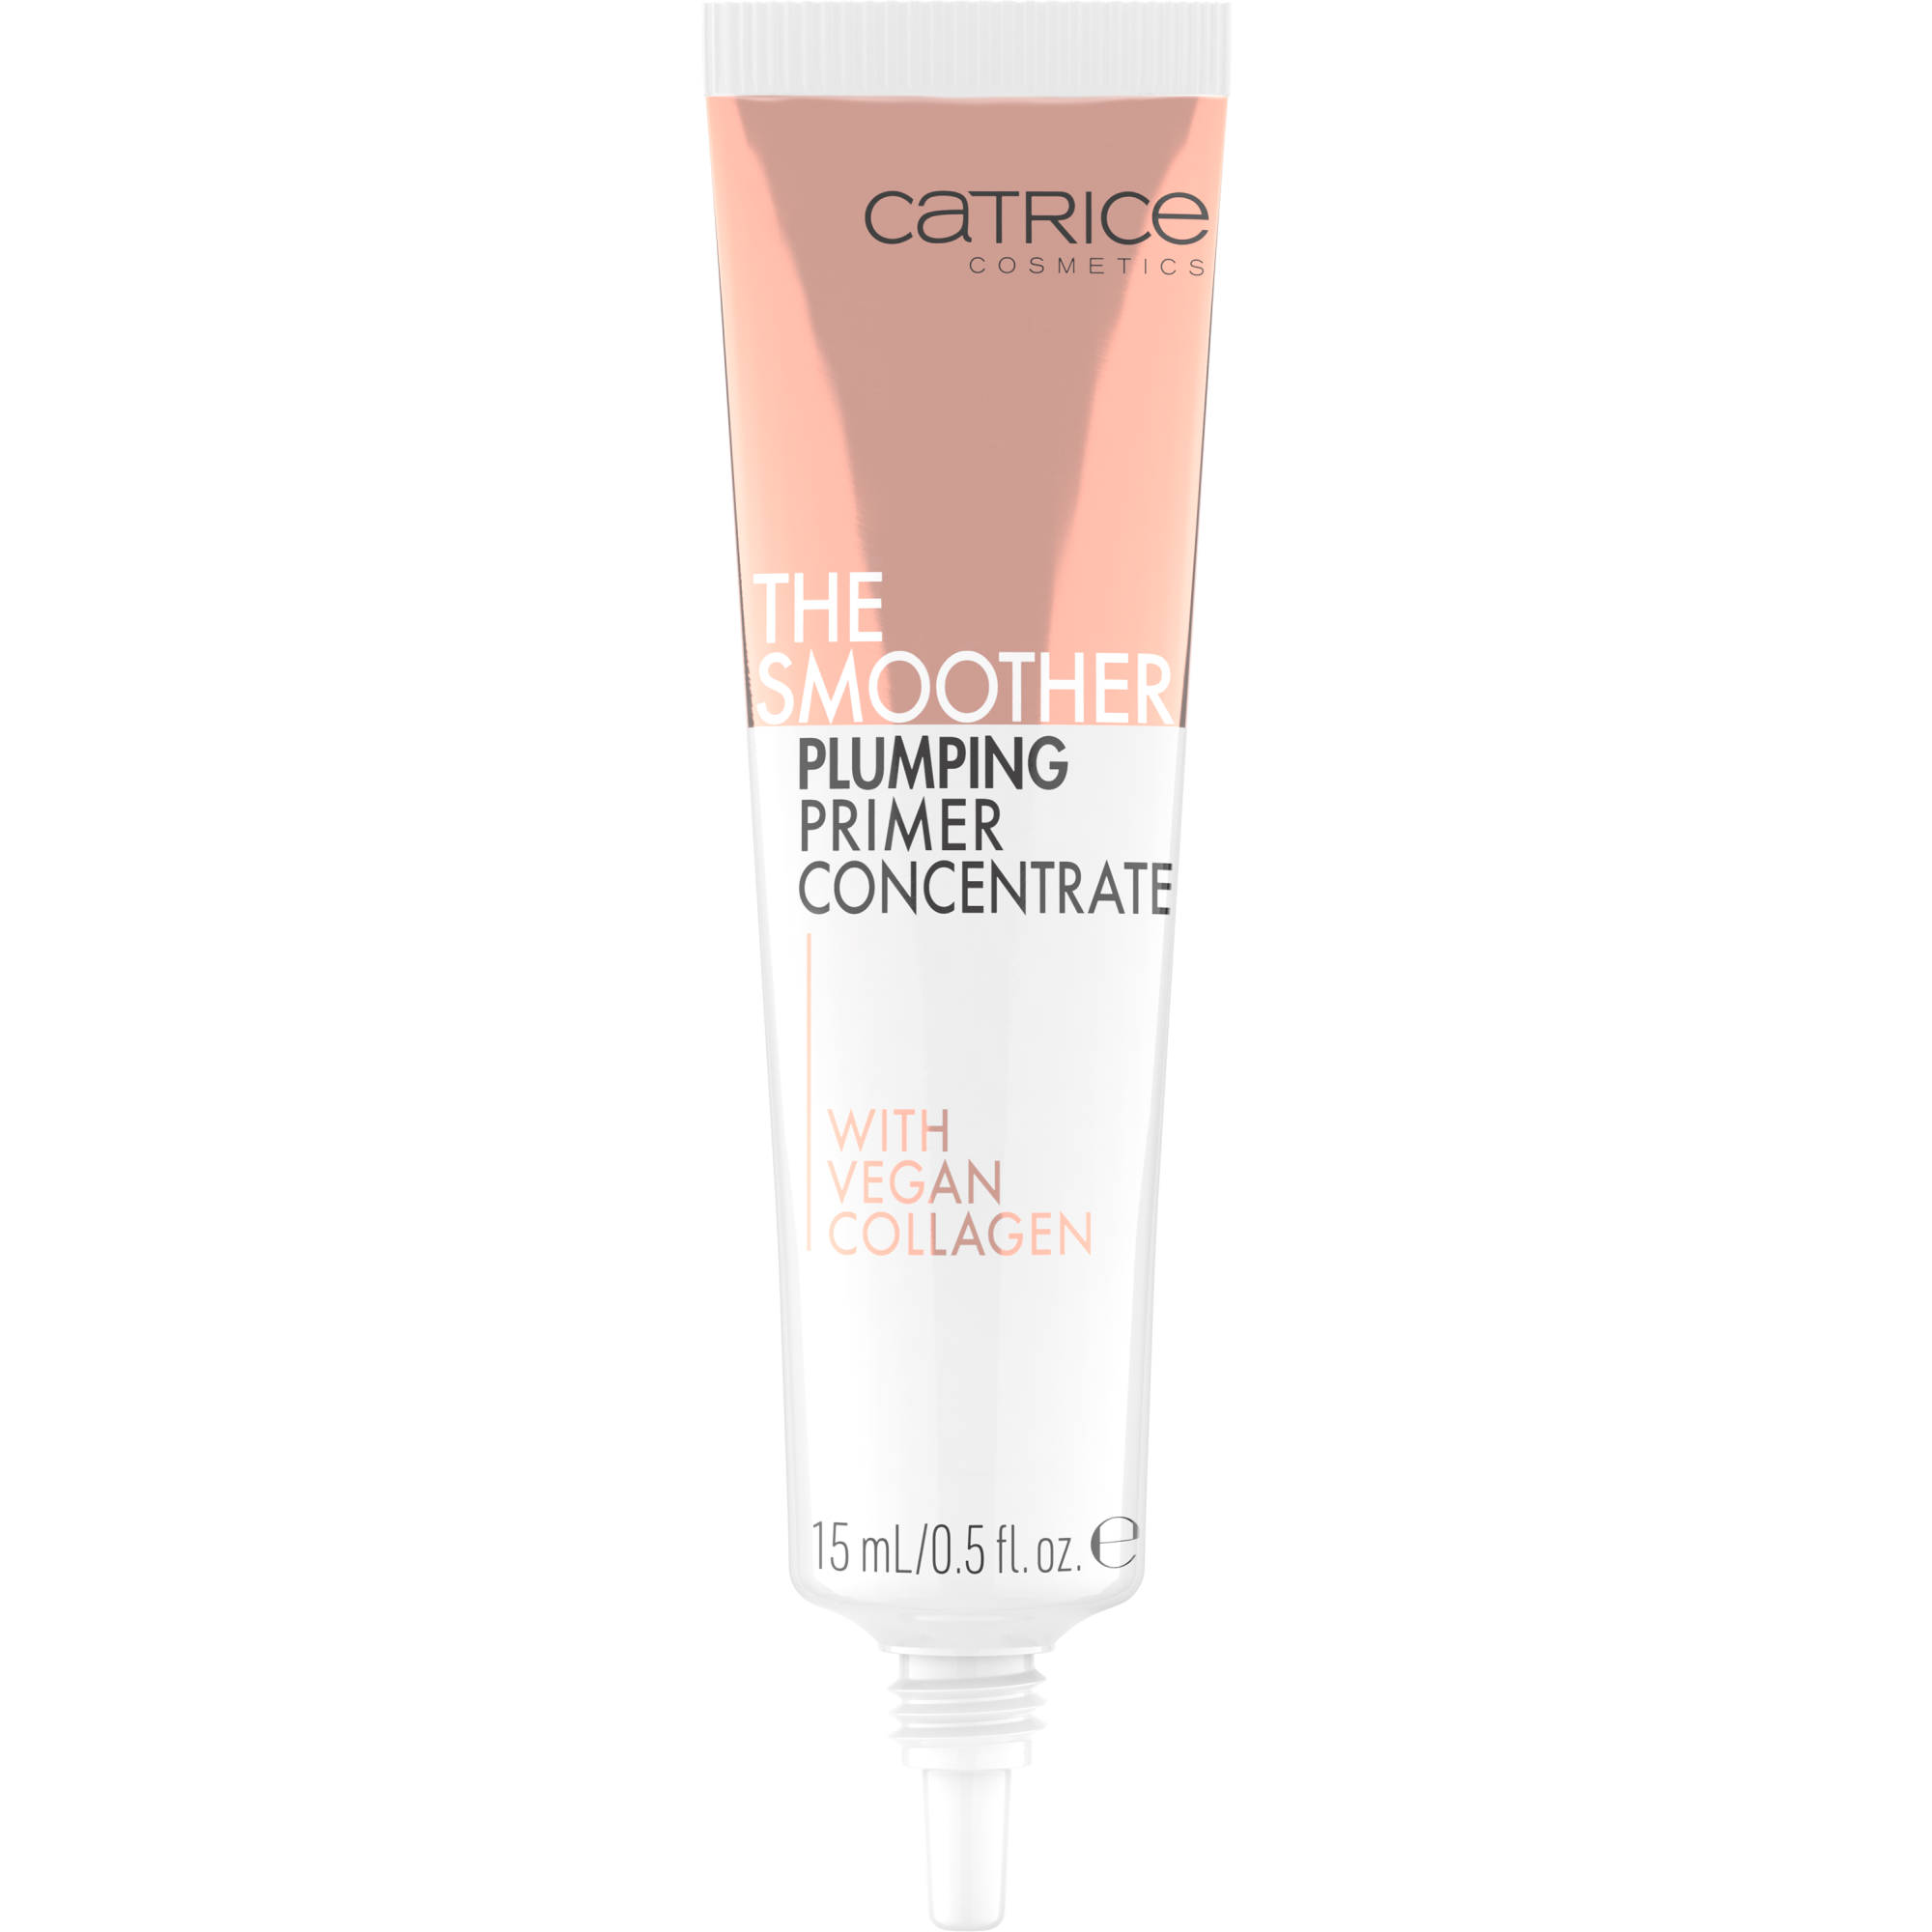 The Smoother Plumping Primer Concentrate primer concentré